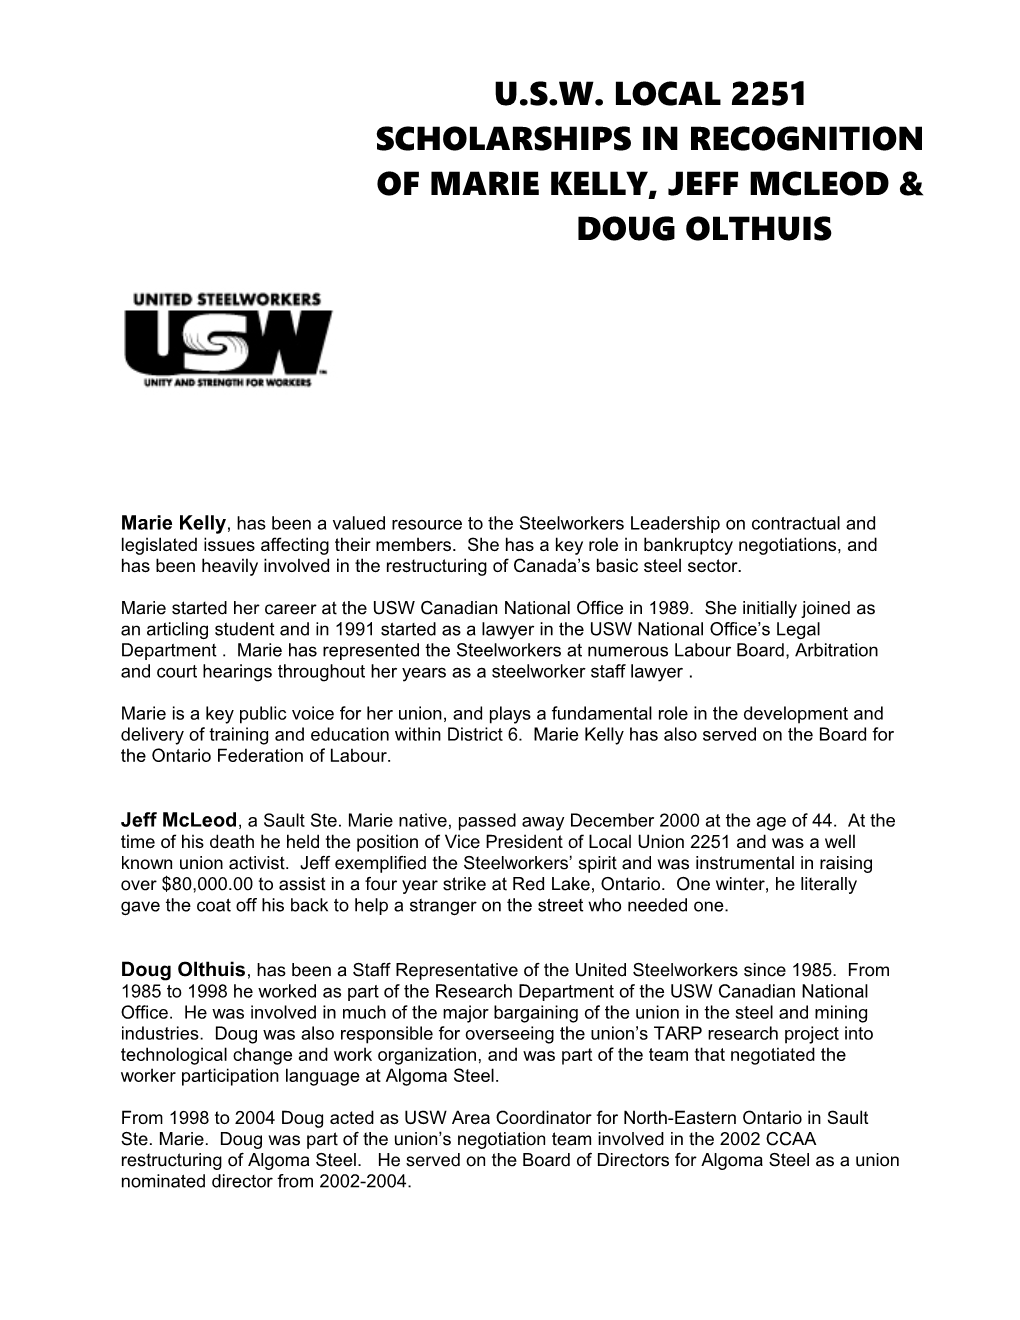 Marie Kelly, Has Been Avalued Resource to the Steelworkers Leadership on Contractual And